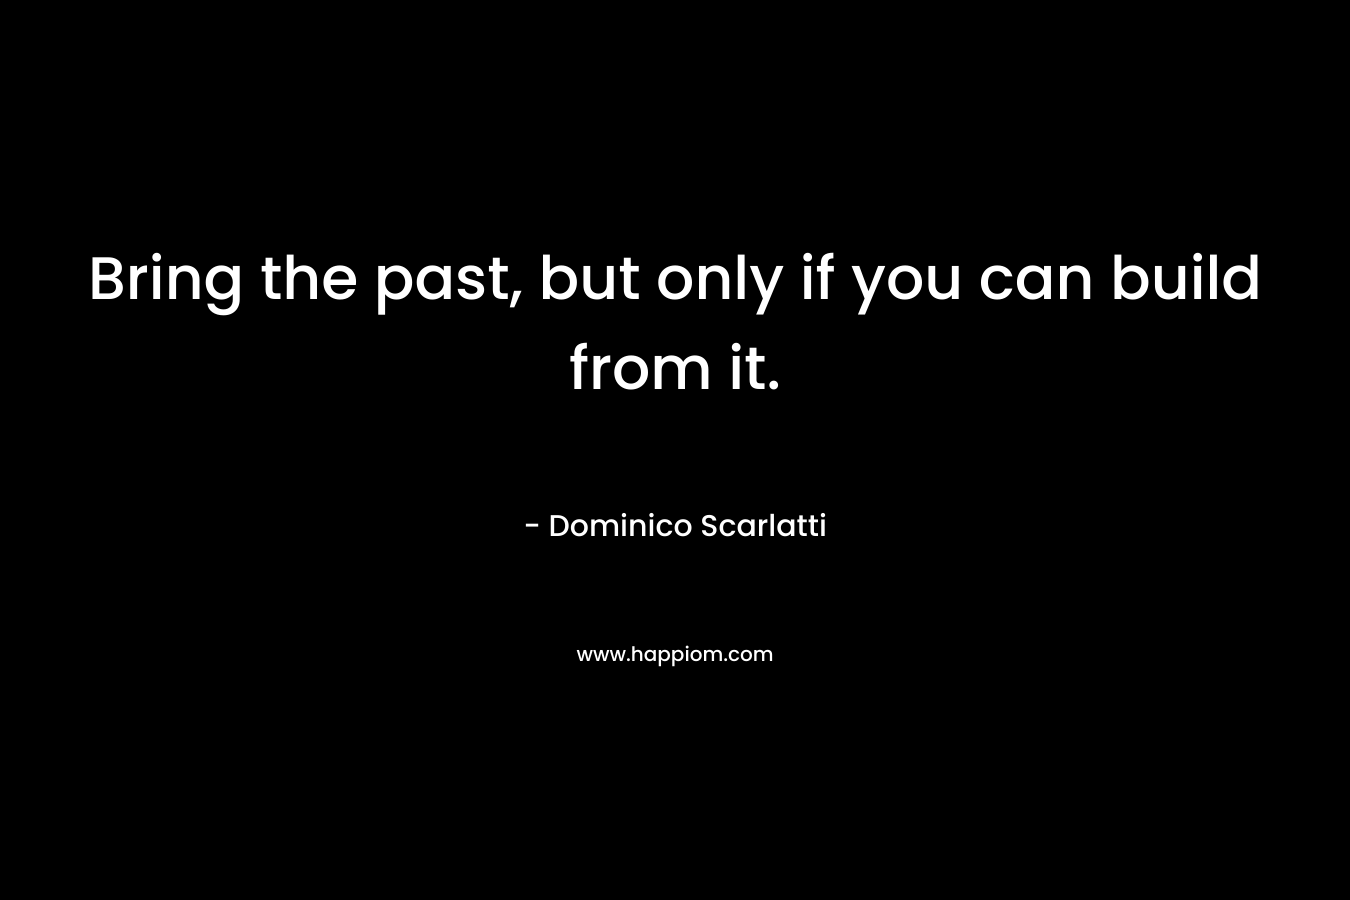 Bring the past, but only if you can build from it. – Dominico Scarlatti